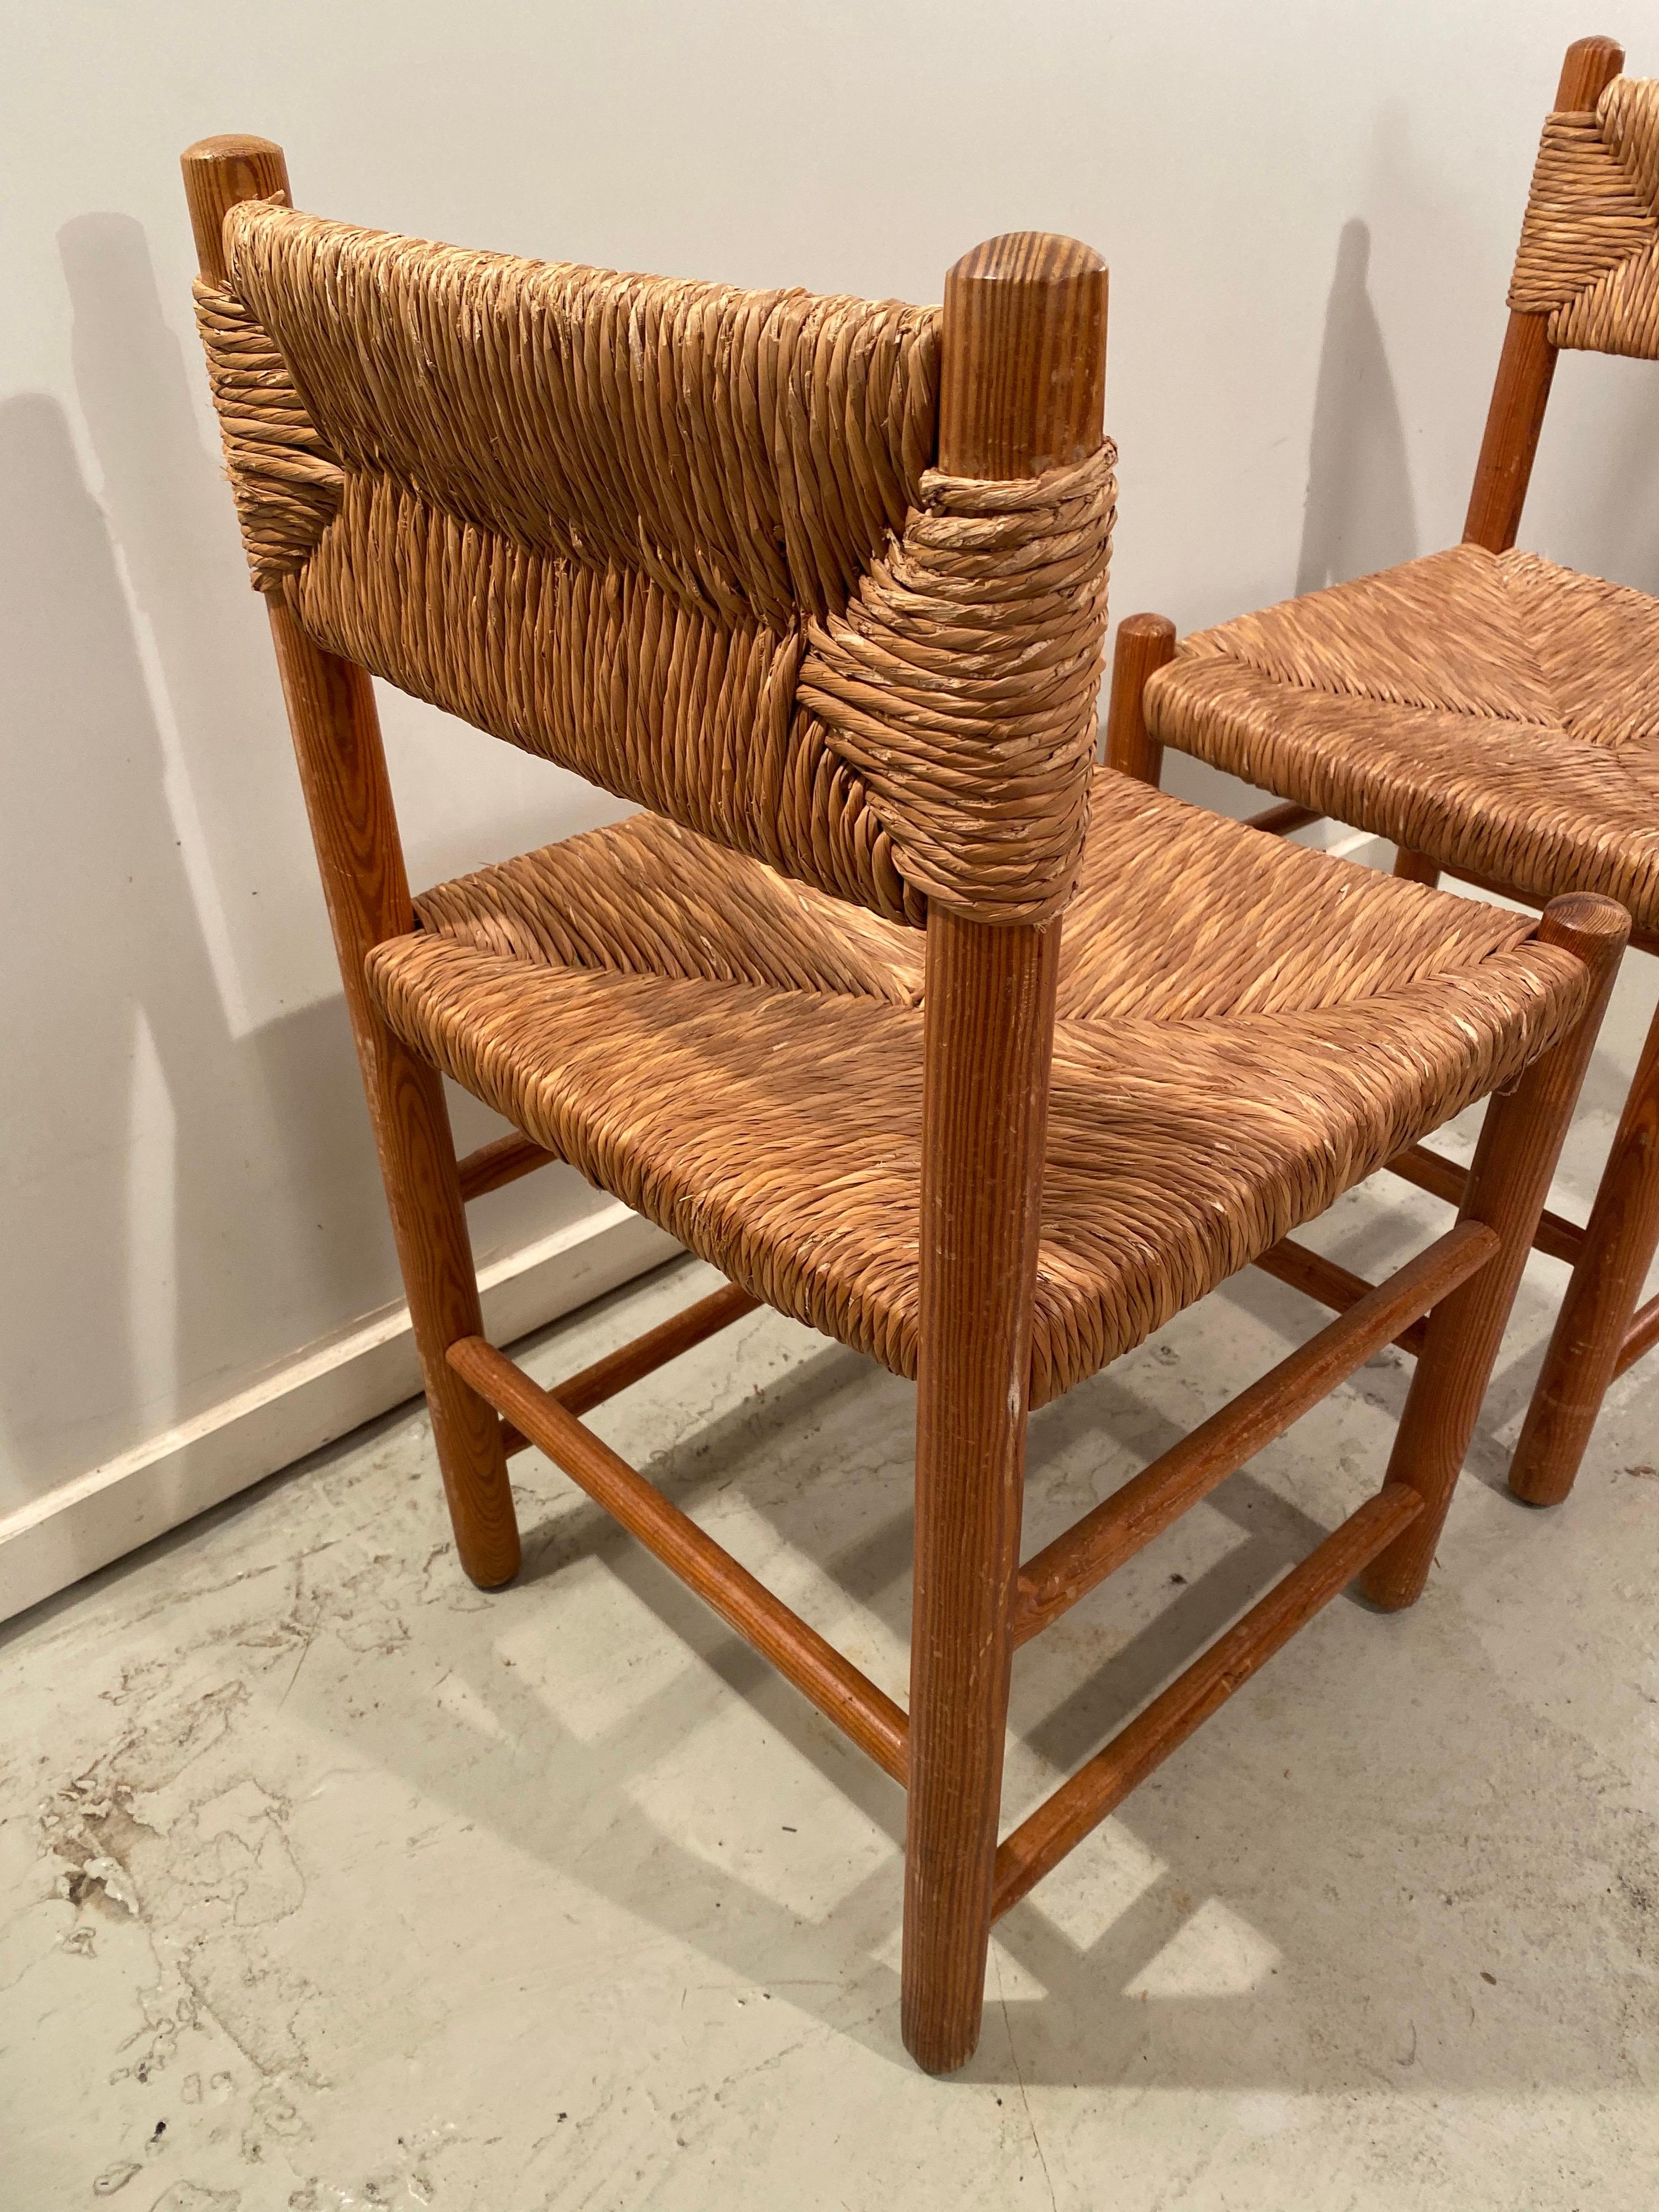 Pair of Wicker Dordogne Chairs by Charlotte Perriand for Sentou, 1950s For Sale 4